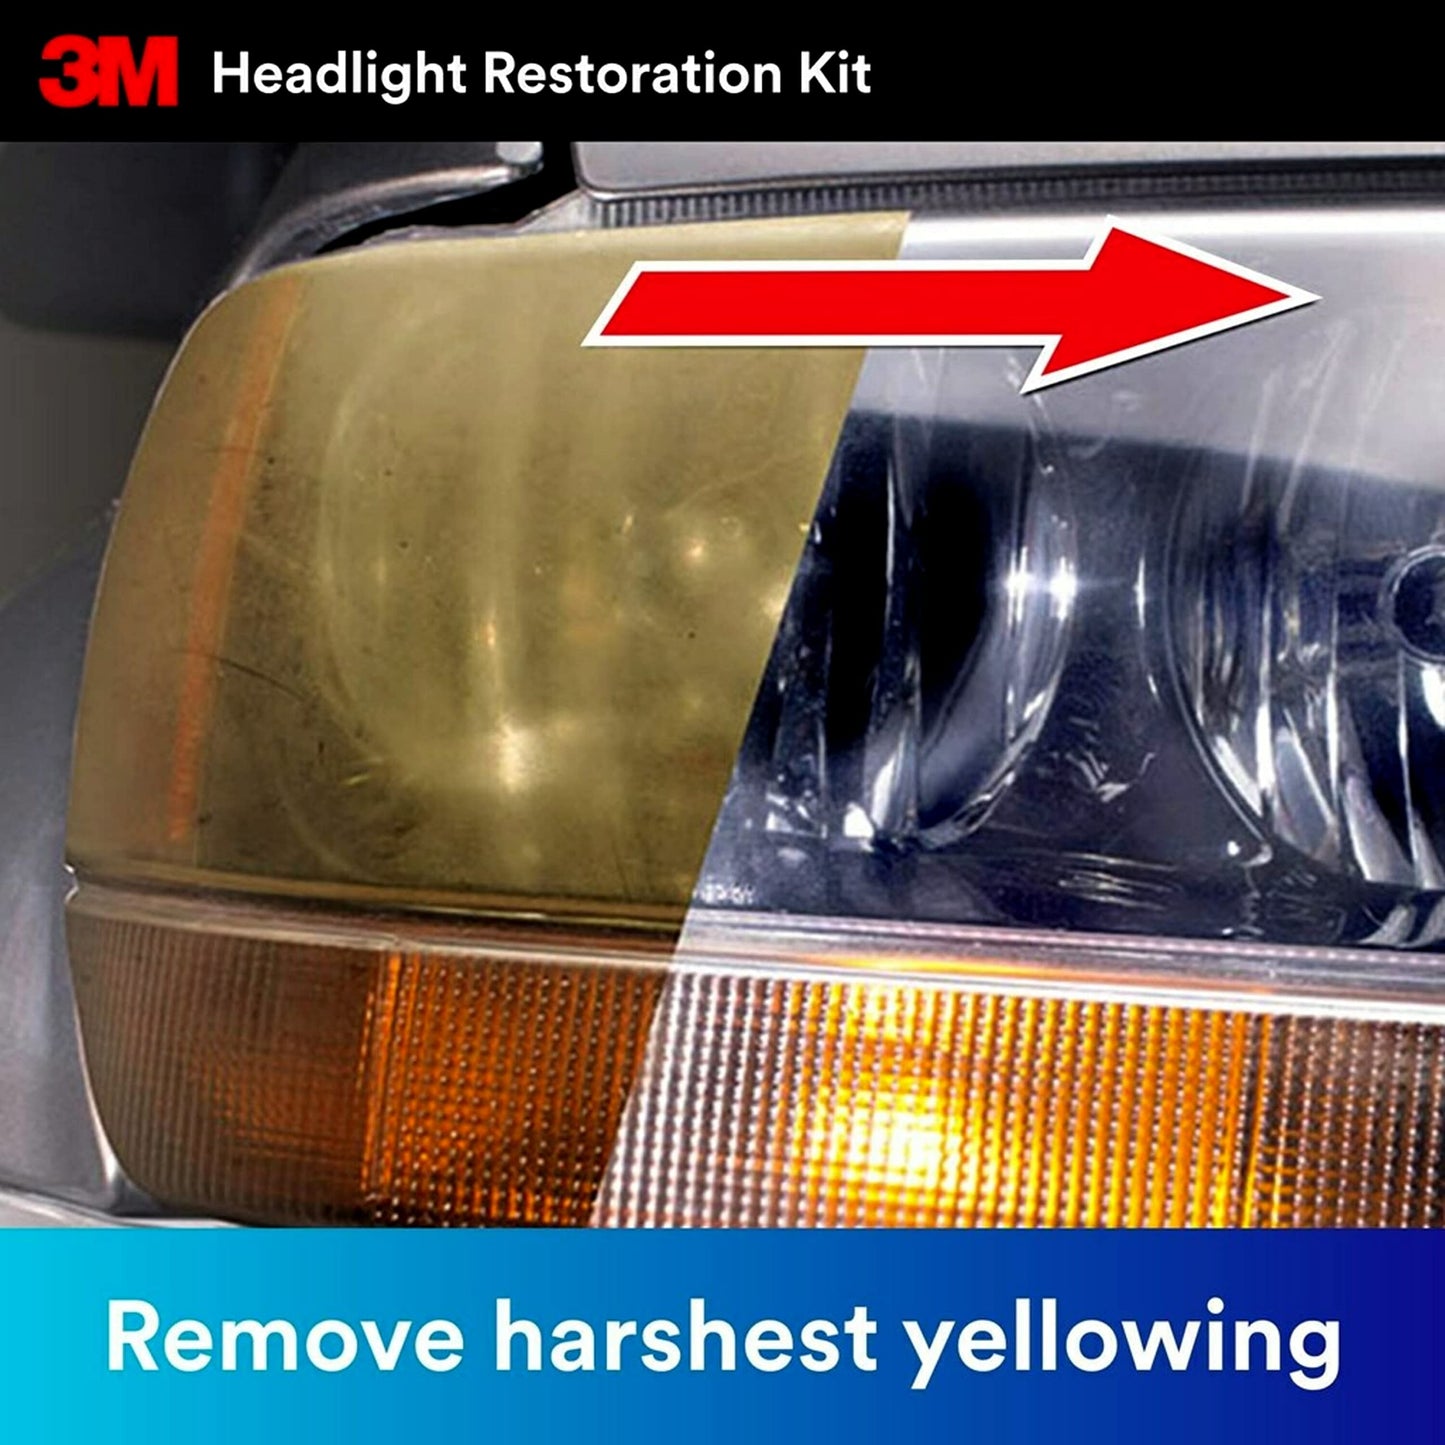 3M Headlight Restoration Kit, Heavy Duty 2-Pack, Easy Heavy Duty Car Headlight Restoration System, Headlight Cleaner and Restorer, Use With A Household Drill